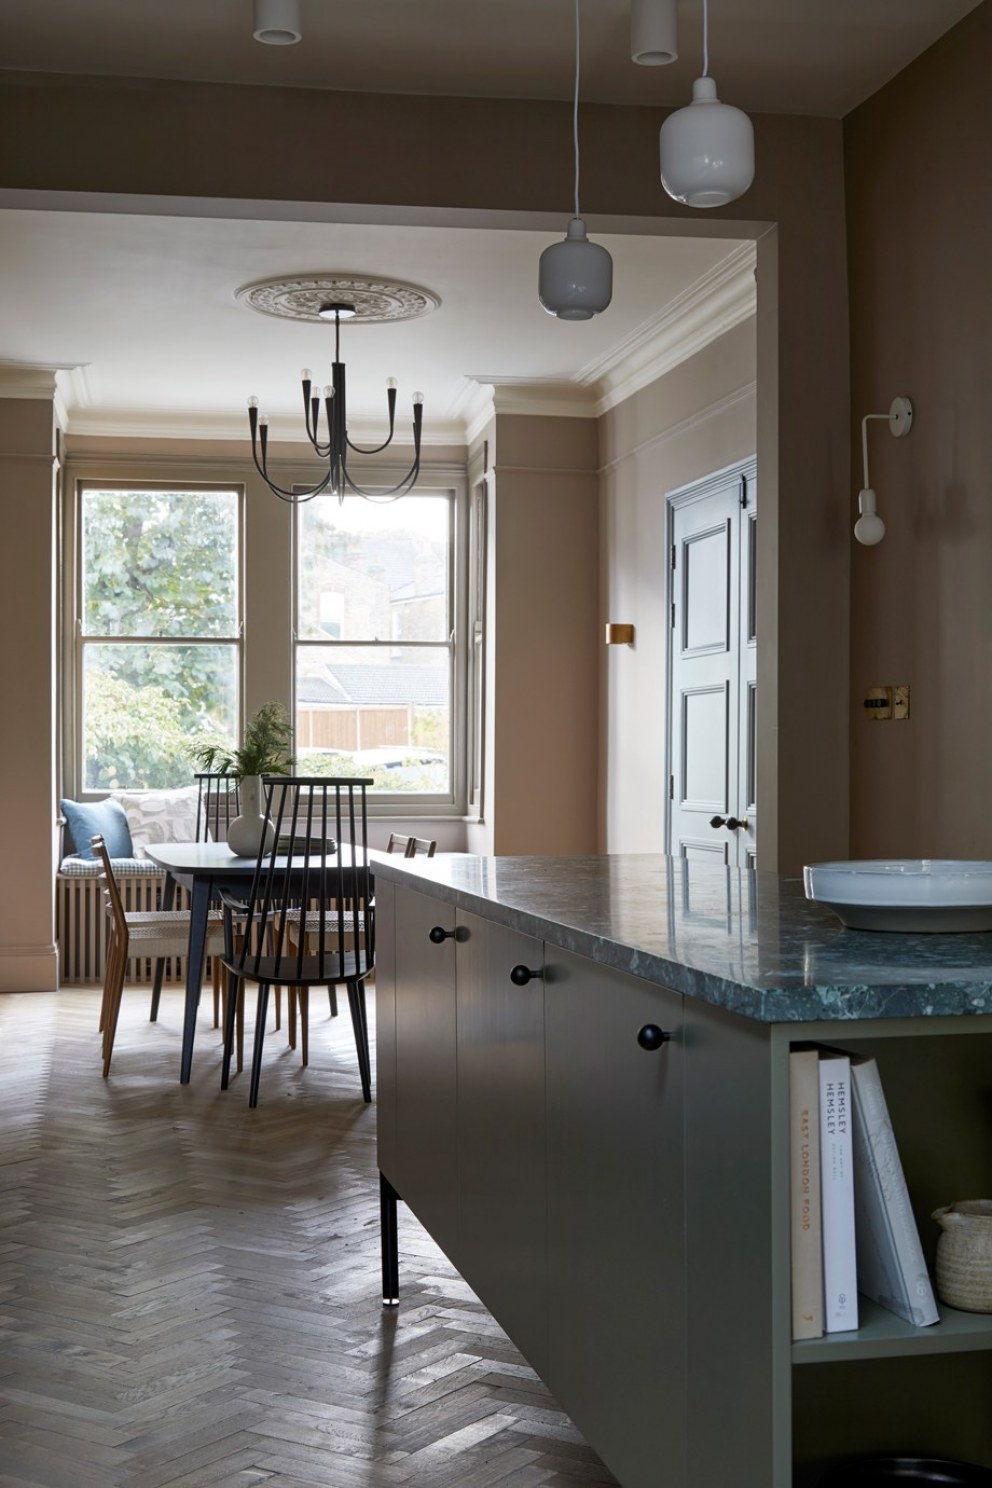 South West London Family Home | Kitchen and dining areas | Interior Designers